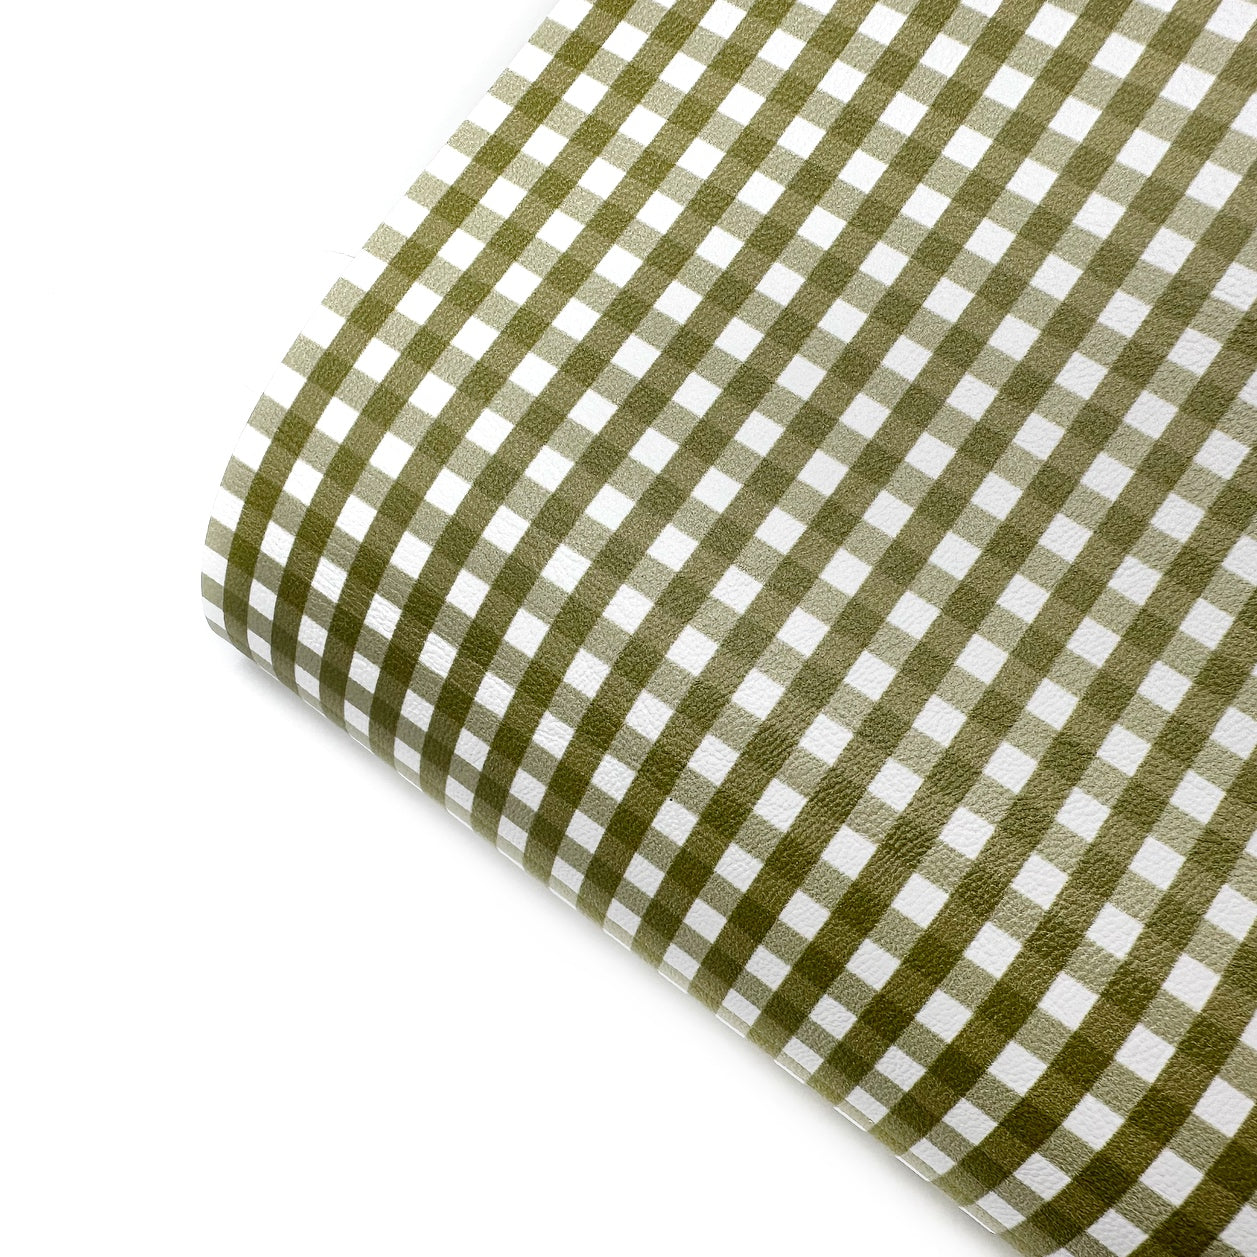 Olive Green Gingham Standard Premium Faux Leather Fabric Sheets